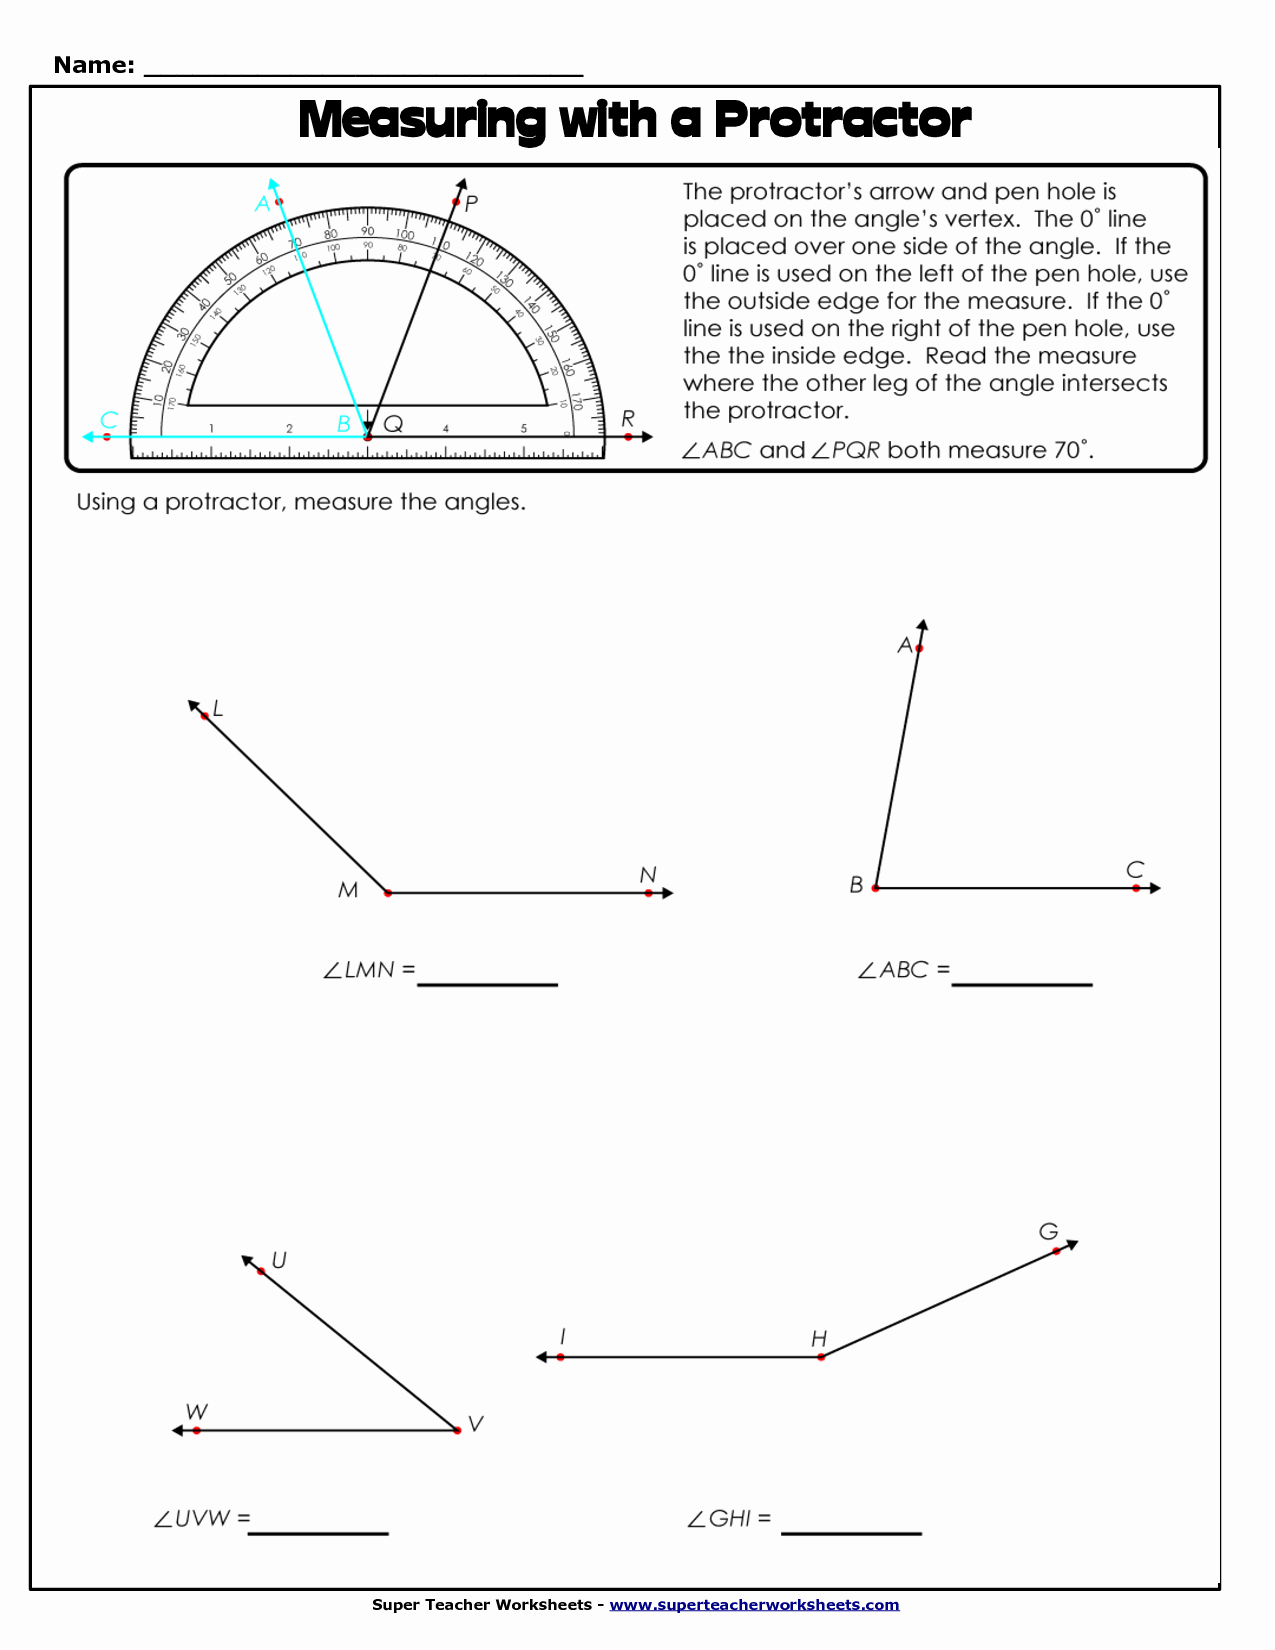 pairs-of-angles-worksheet-answers